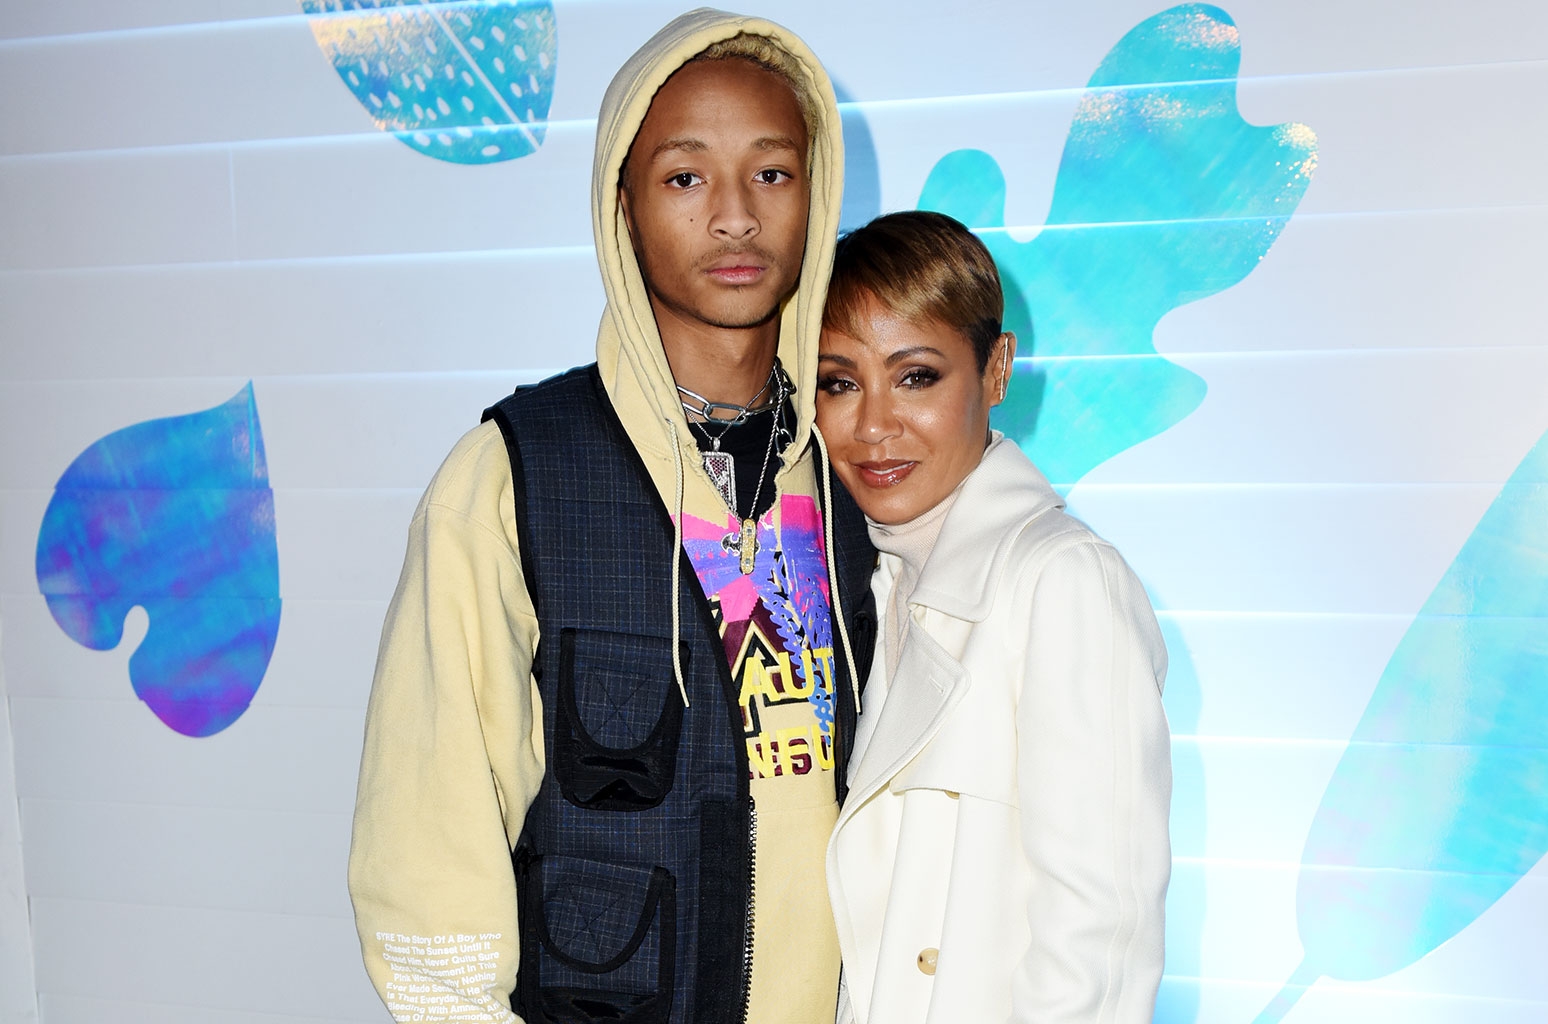 Will & Jada Smith Talk Staging ‘Intervention’ for Jaden Smith After Feeling ‘Really Nervous’ About His Eating Habits